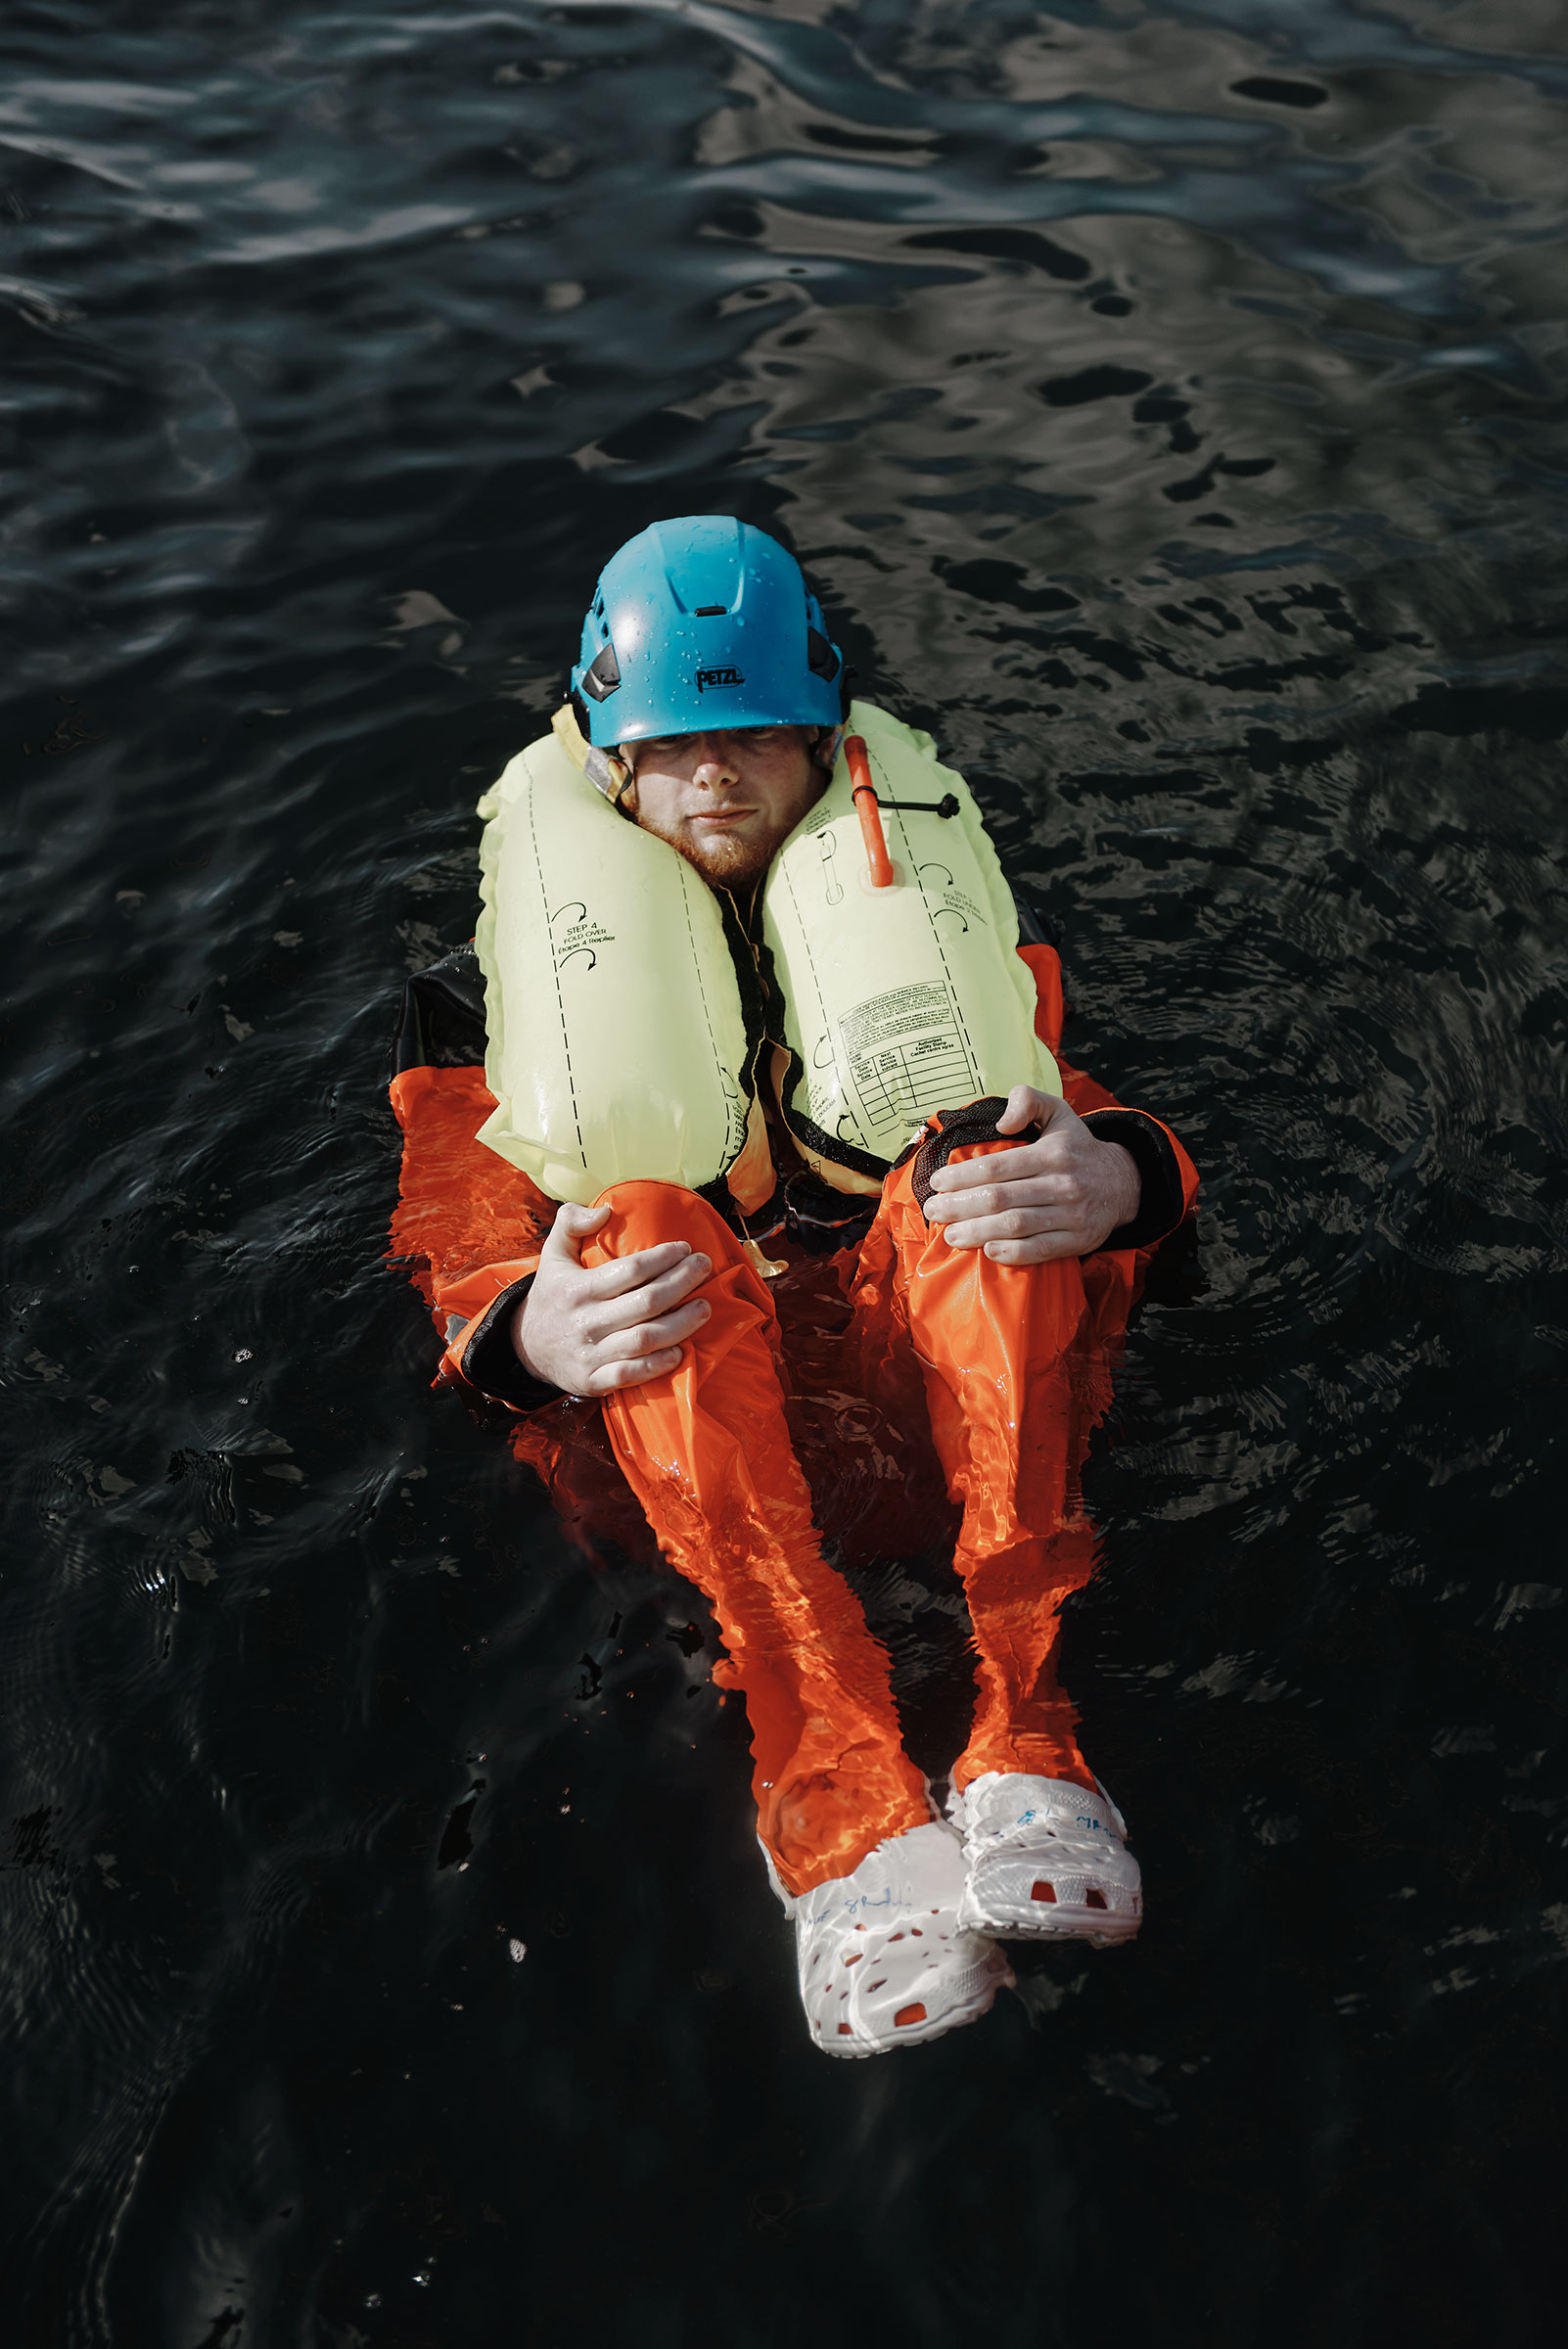 Paul Doolan floats in the water during an emergency survival course at the <a href="https://time.com/6123696/offshore-wind-jobs/">Massachusetts Maritime Academy</a> in Bourne, Mass. (Tony Luong for TIME)